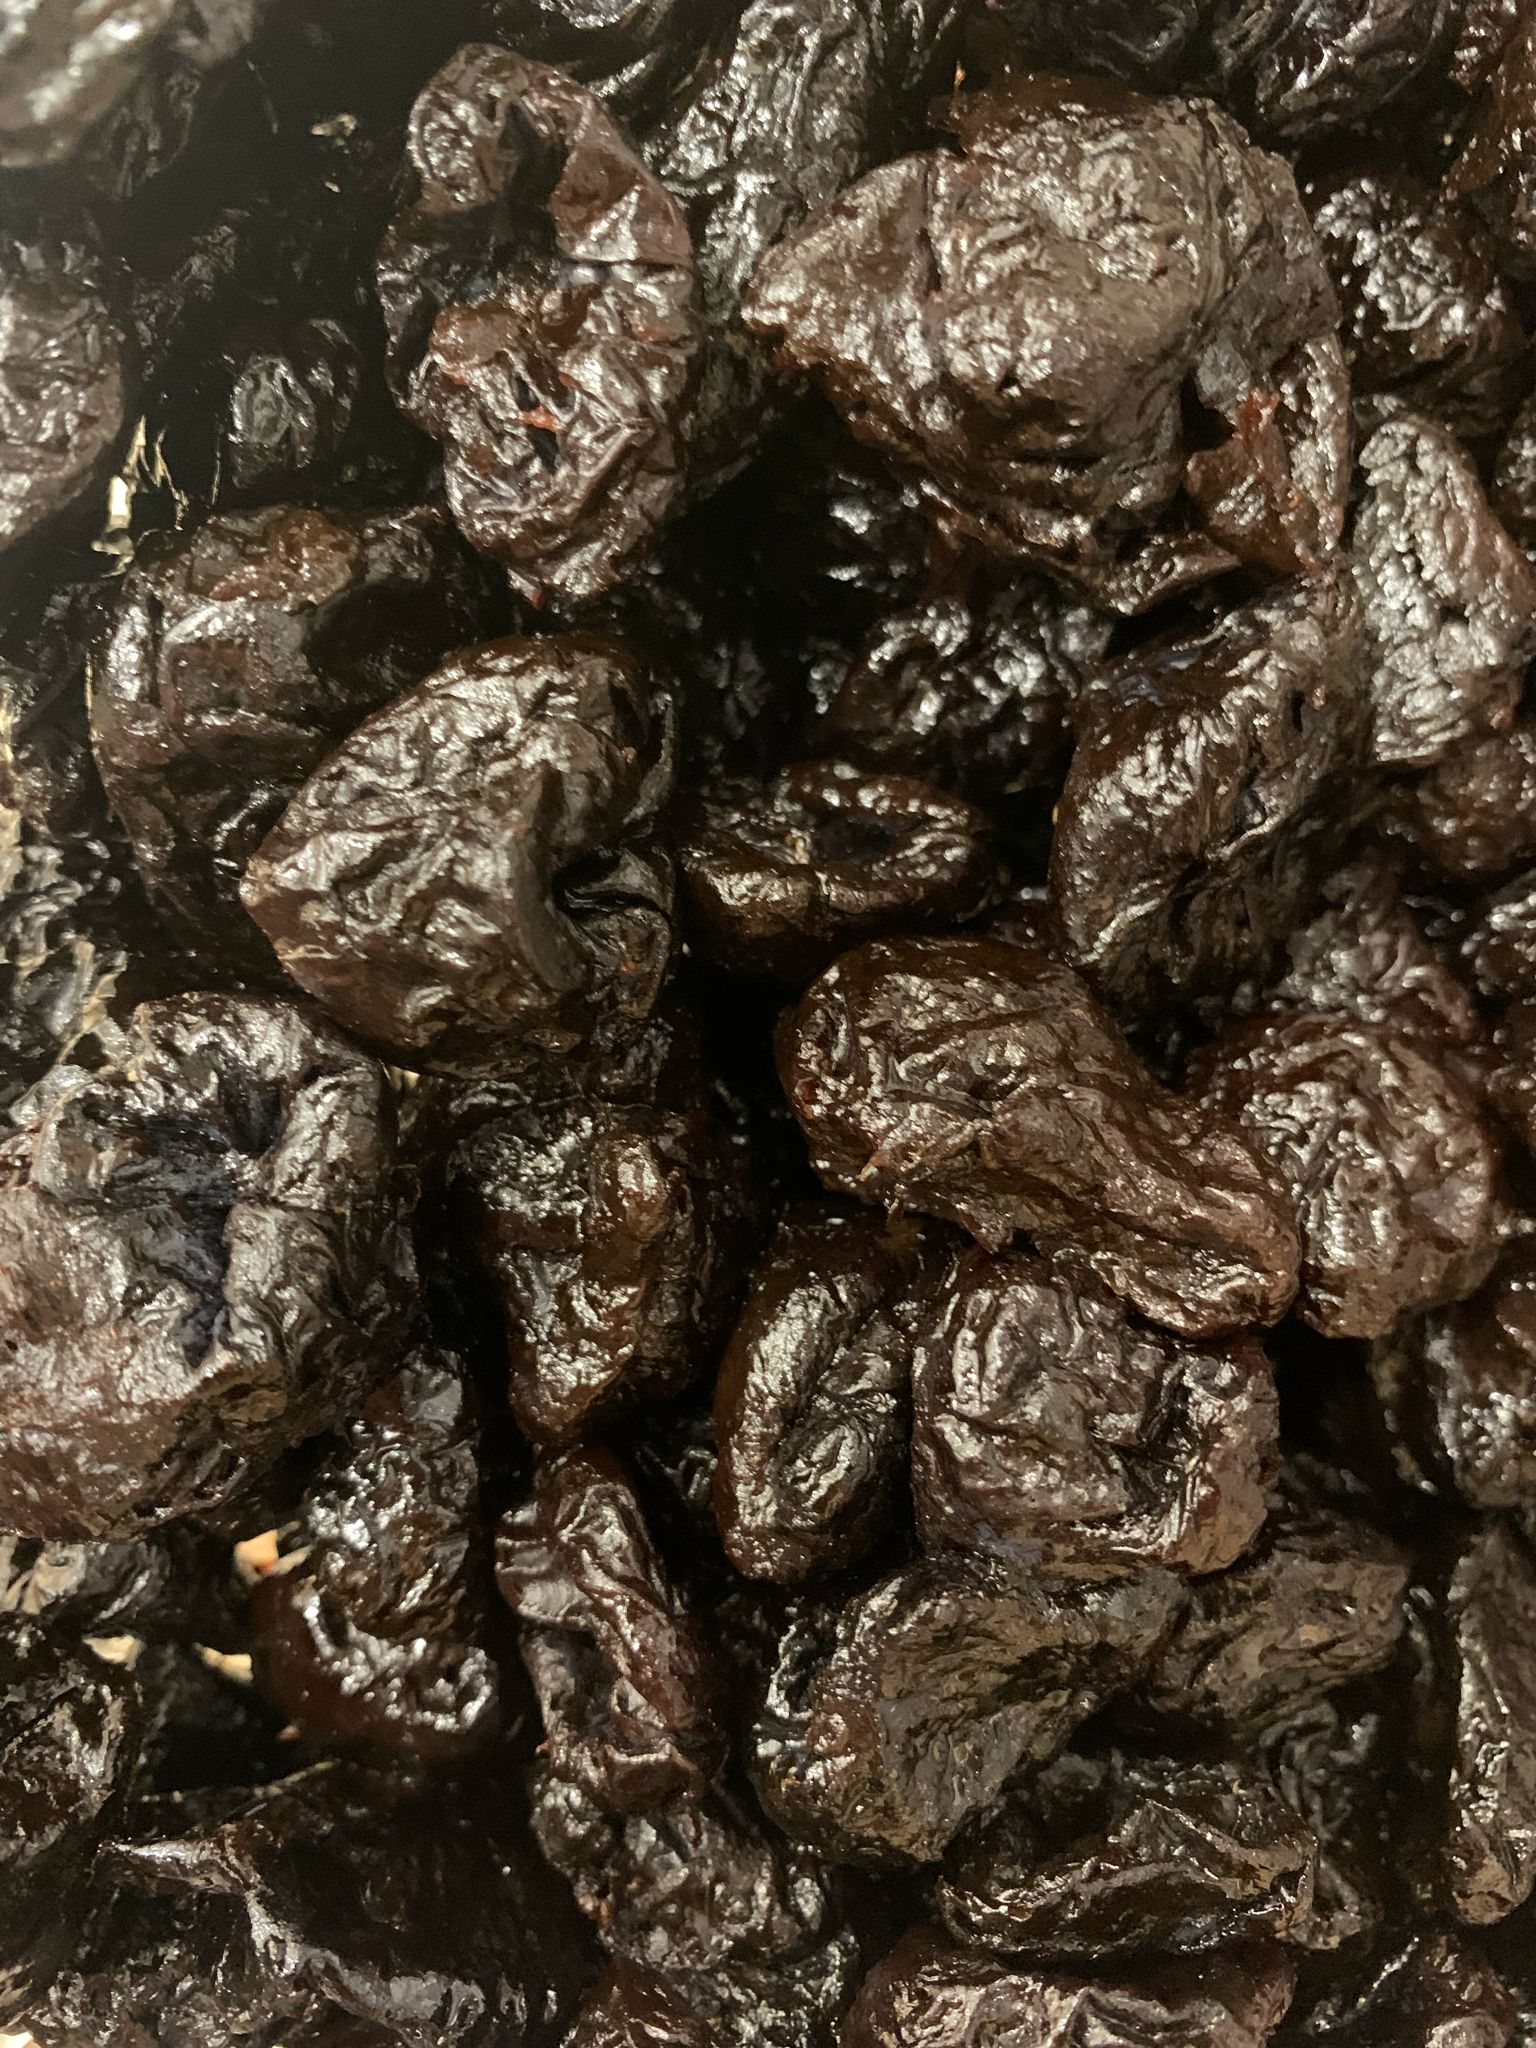 Prunes (Pitted)